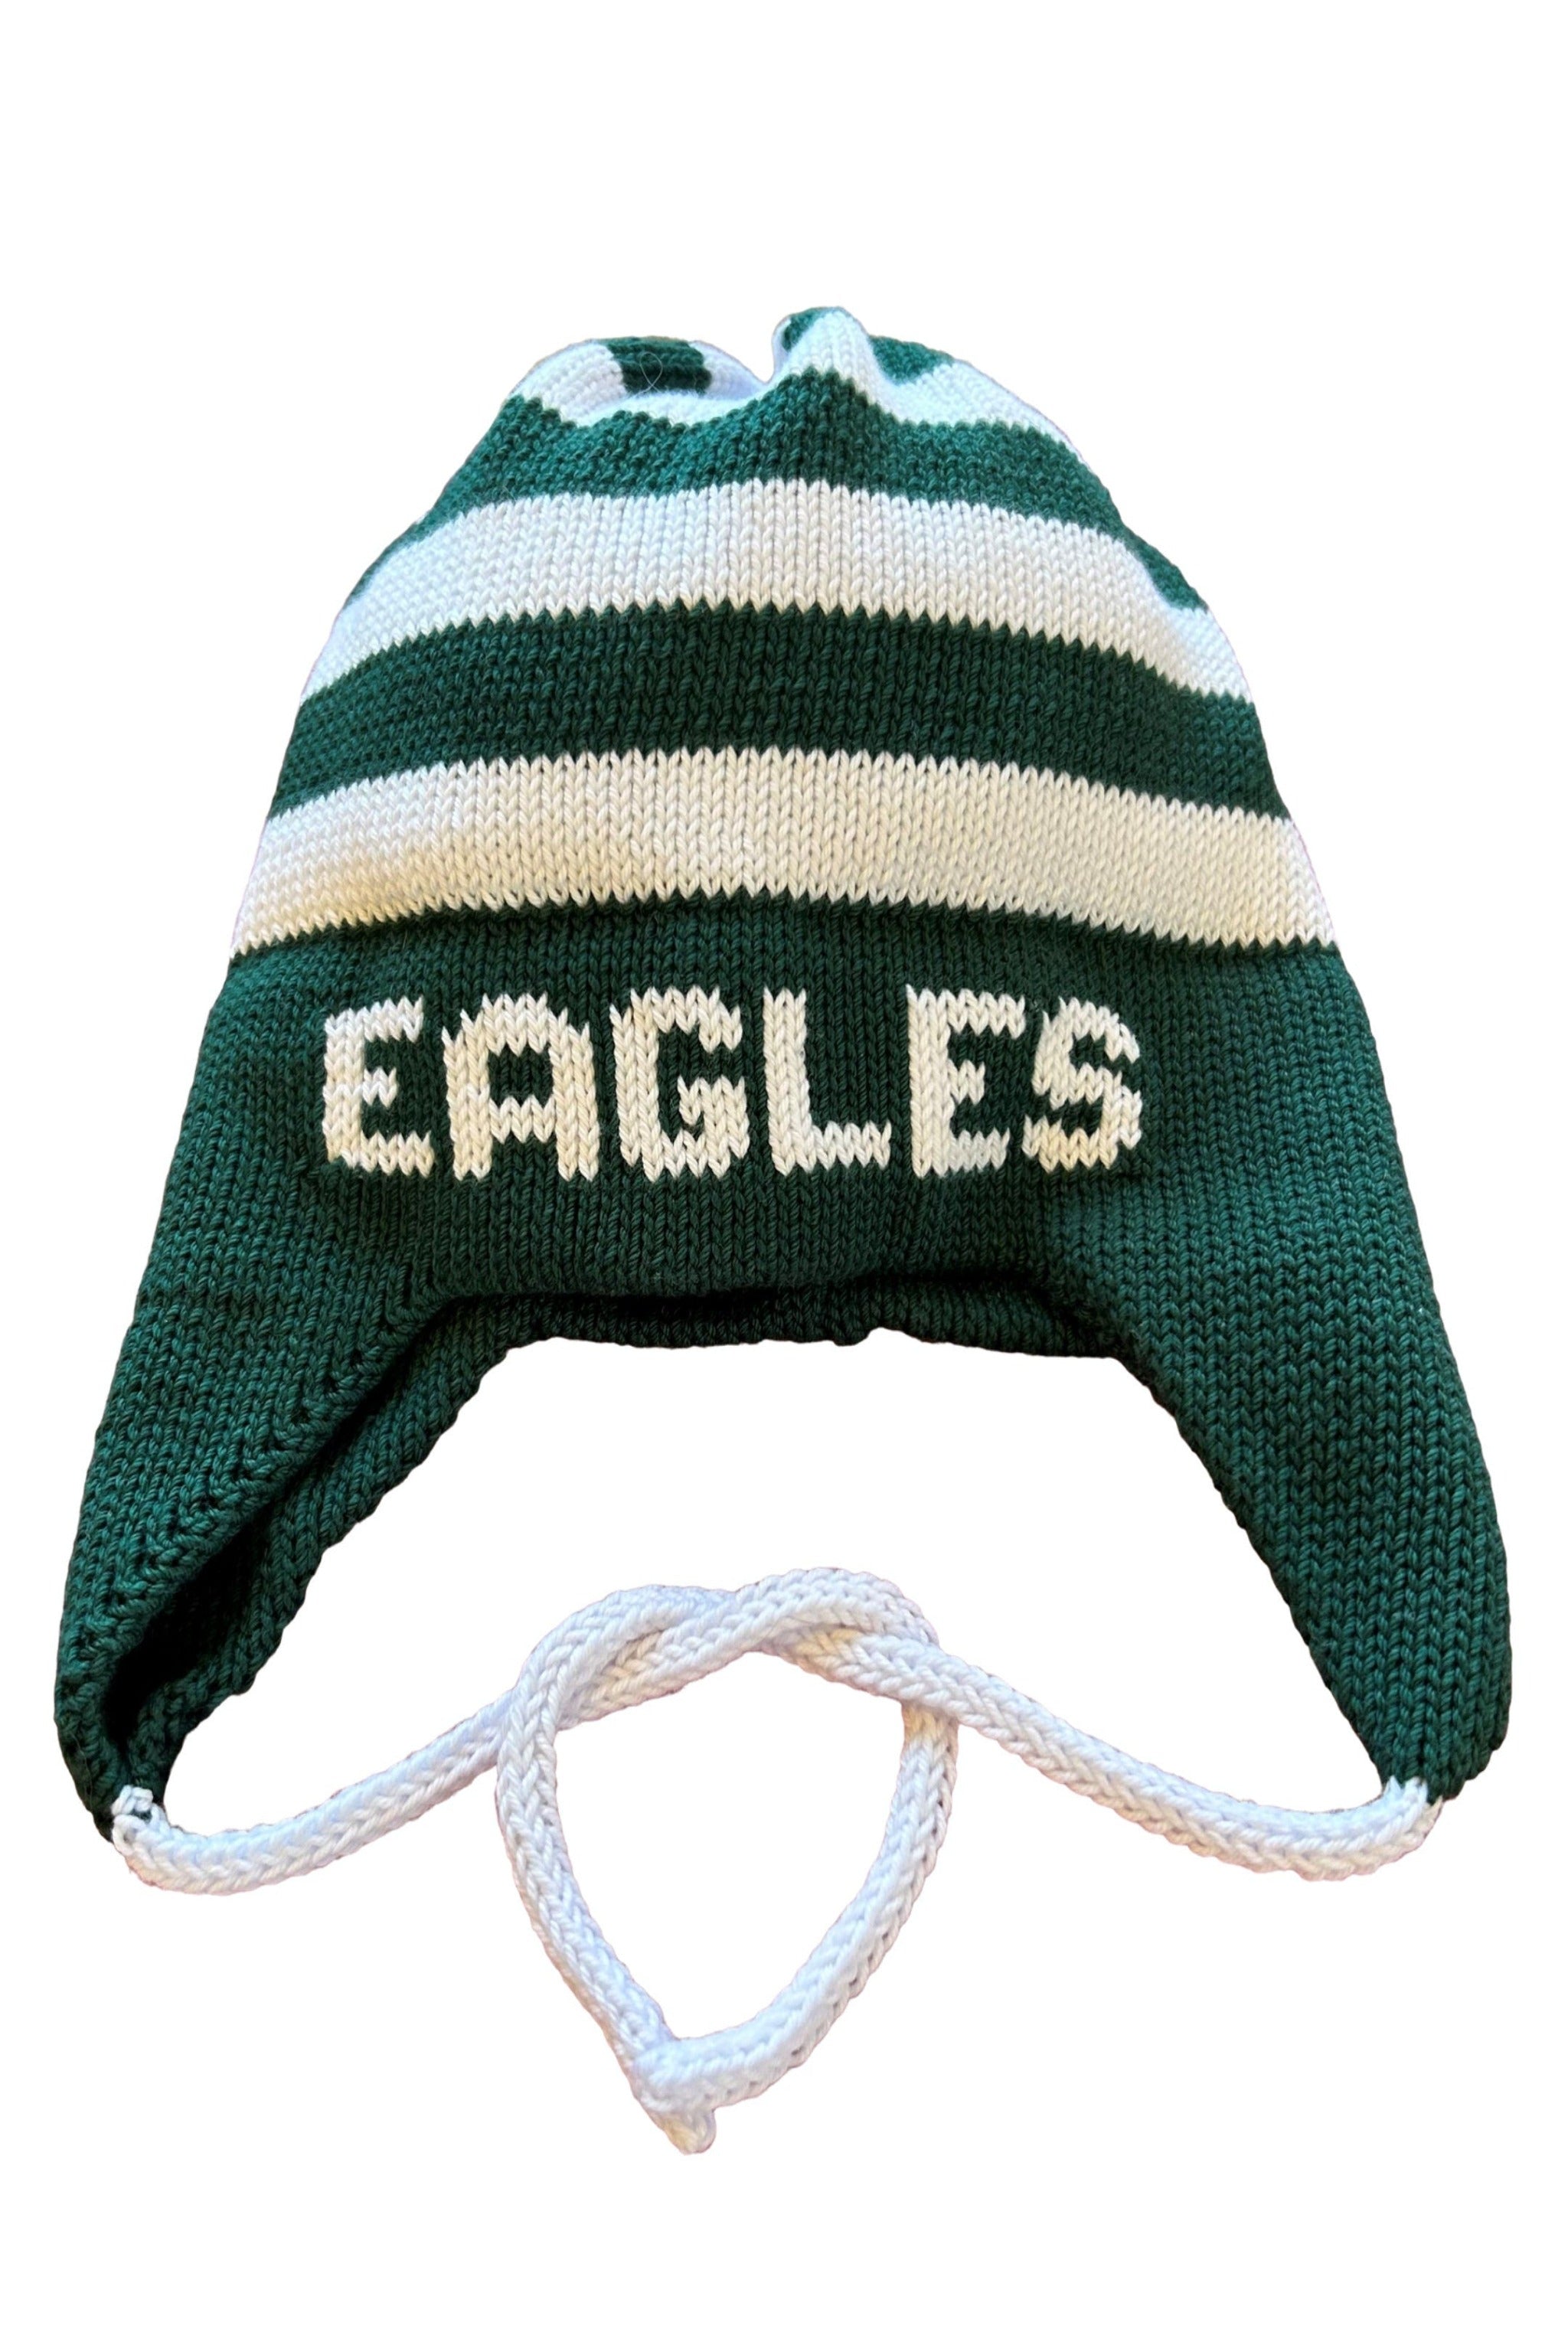 Team or School Spirit Striped Earflap Hat - Custom Knits for Baby